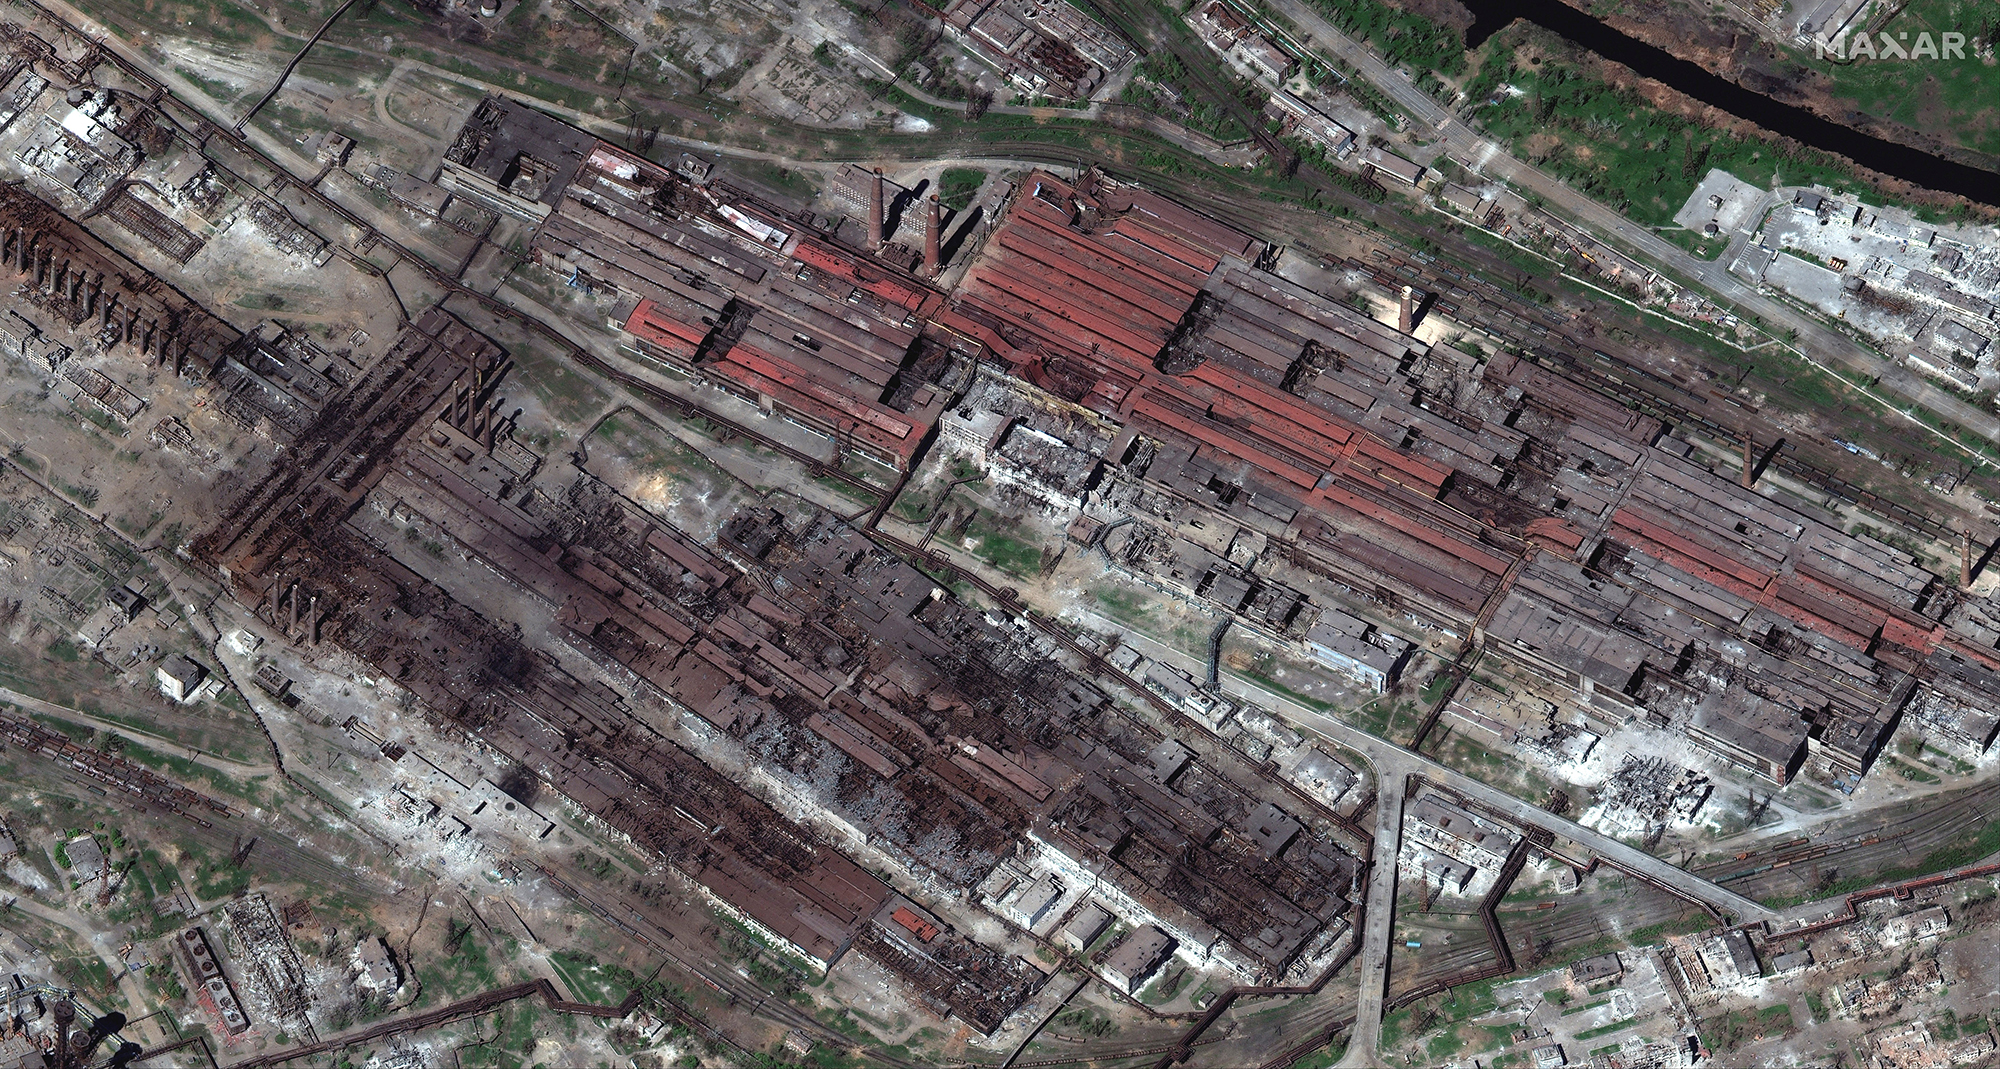 A satellite image shows an overview of the destruction at the Azovstal steel plant in Mariupol, Ukraine, on April 29.